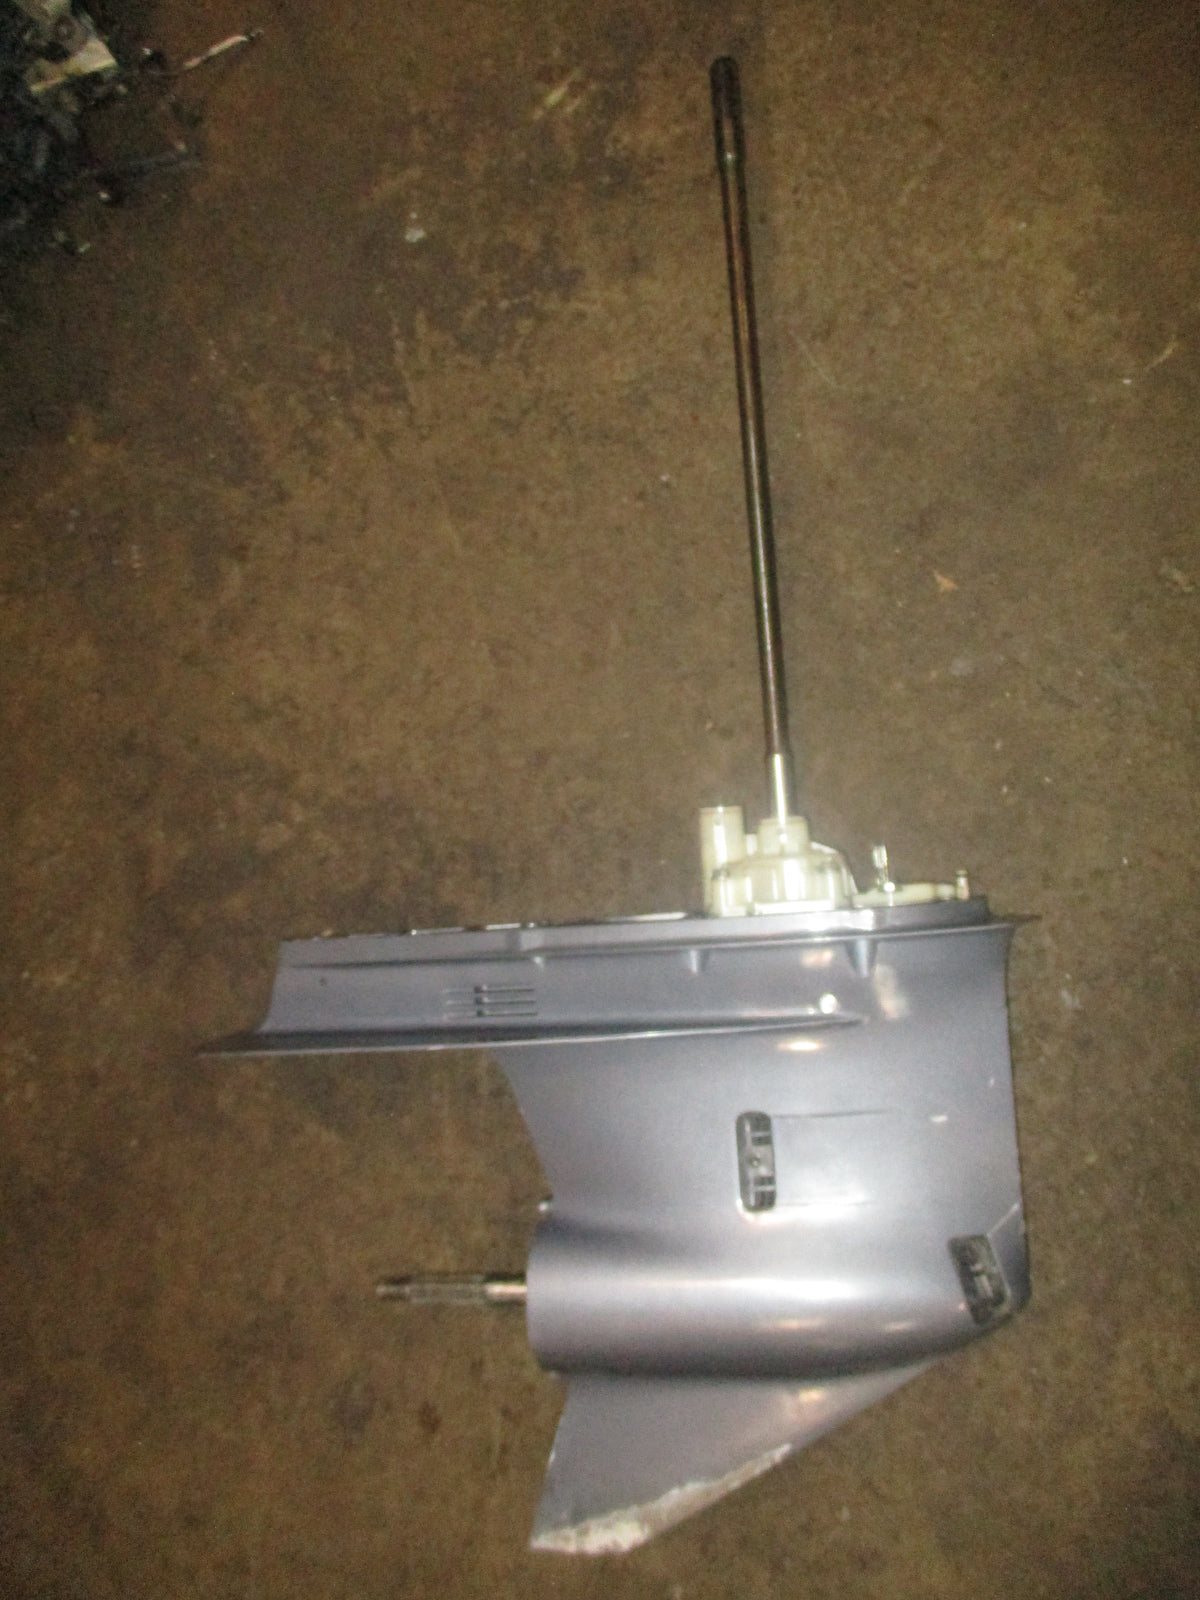 Yamaha 300hp outboard 25" lower unit